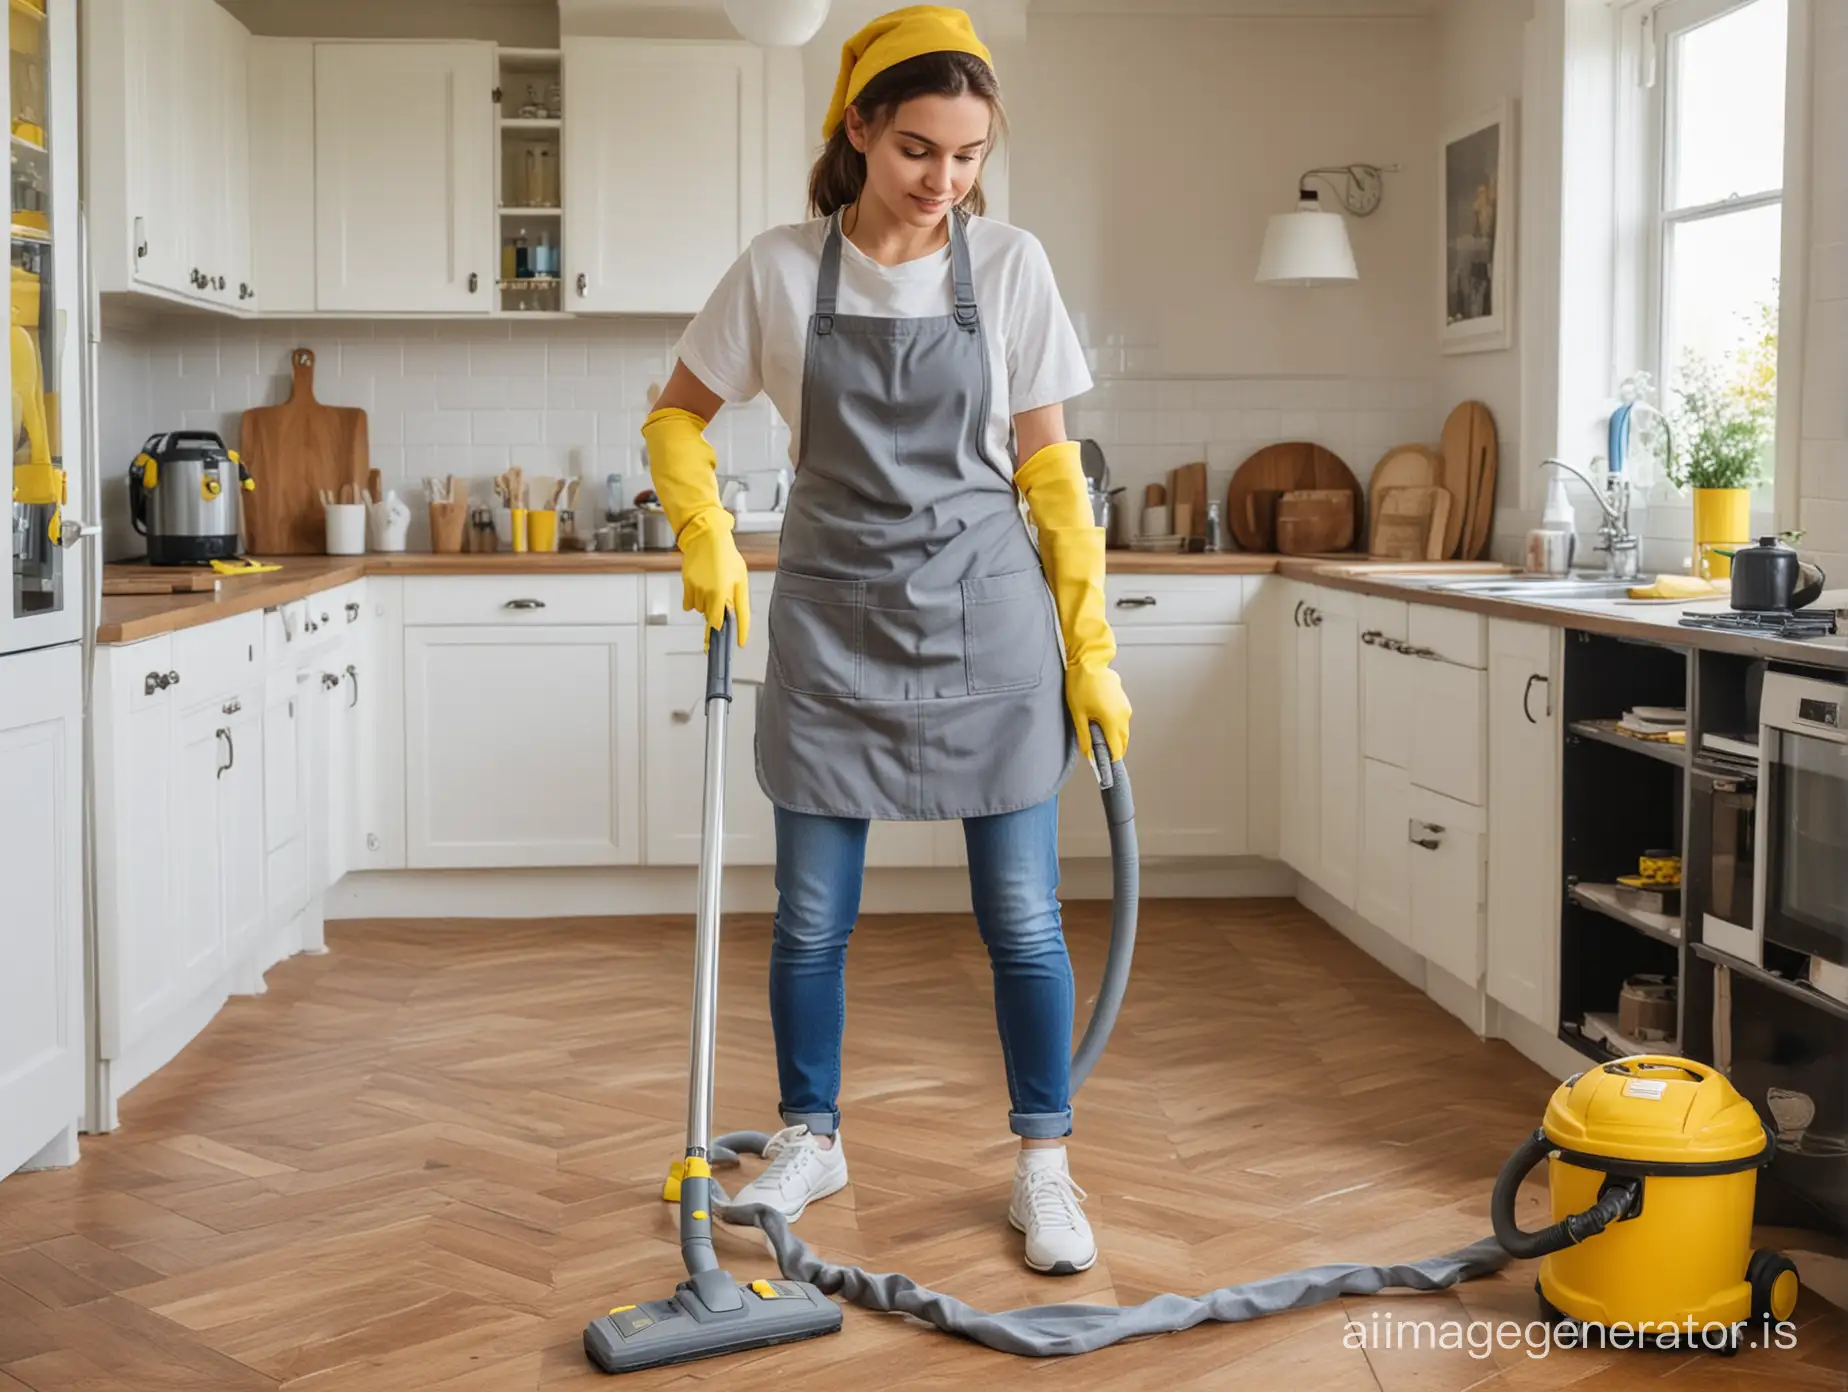 In the center of the picture is a brunette girl, cleaning. She wears gray aprons and yellow gloves. She has a gray cap on her head. She's wearing pants, jeans, and sneakers. In the background, there is a country house setting. Next to her stands a yellow vacuum cleaner.